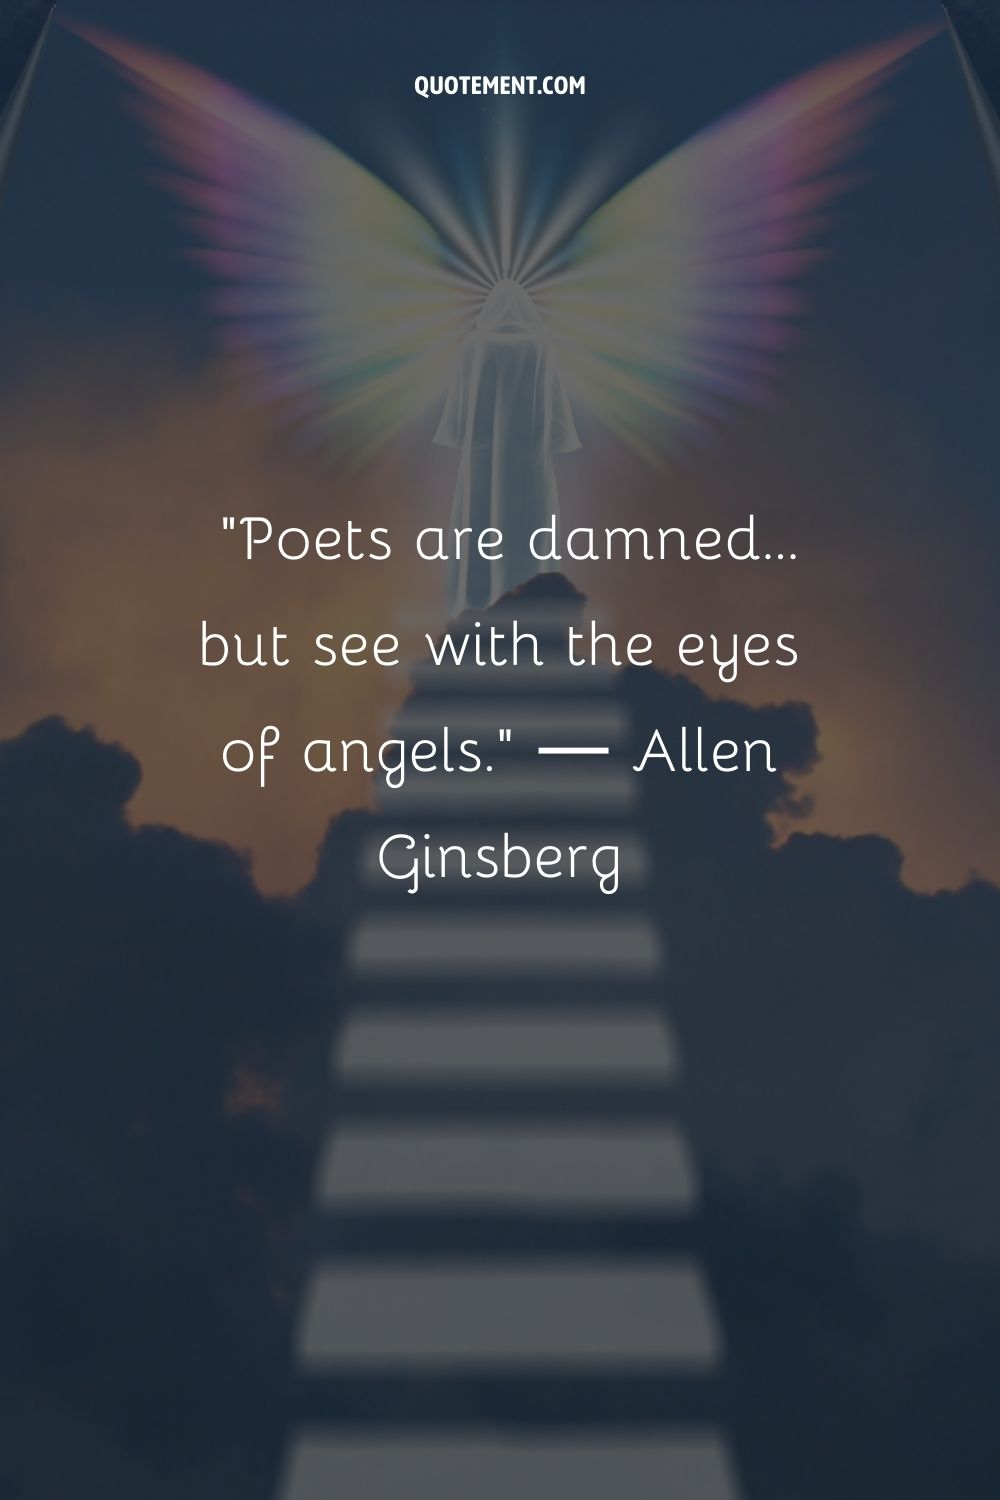 Poets are damned… but see with the eyes of angels.